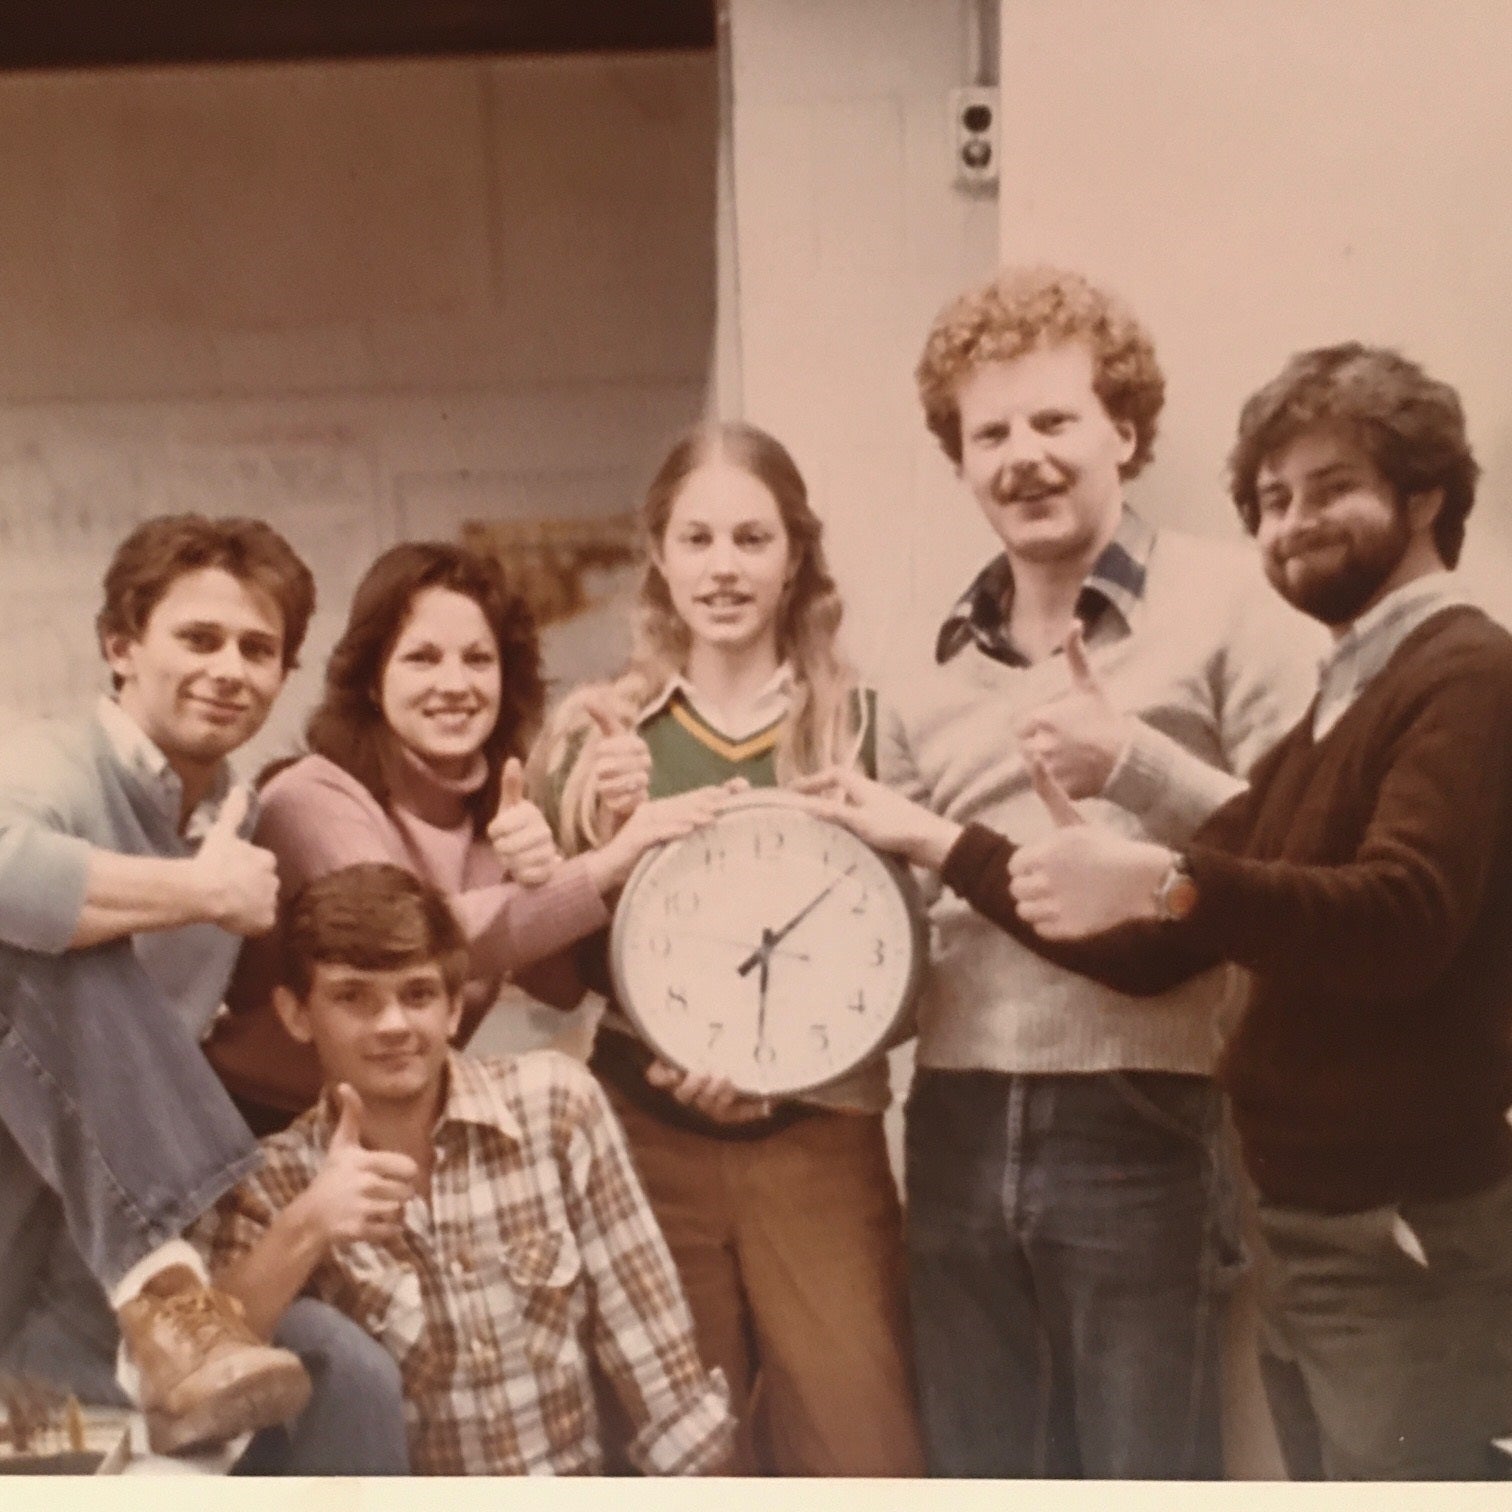 Planning Class of '81 holding up a clock after a long night of PLAN 300